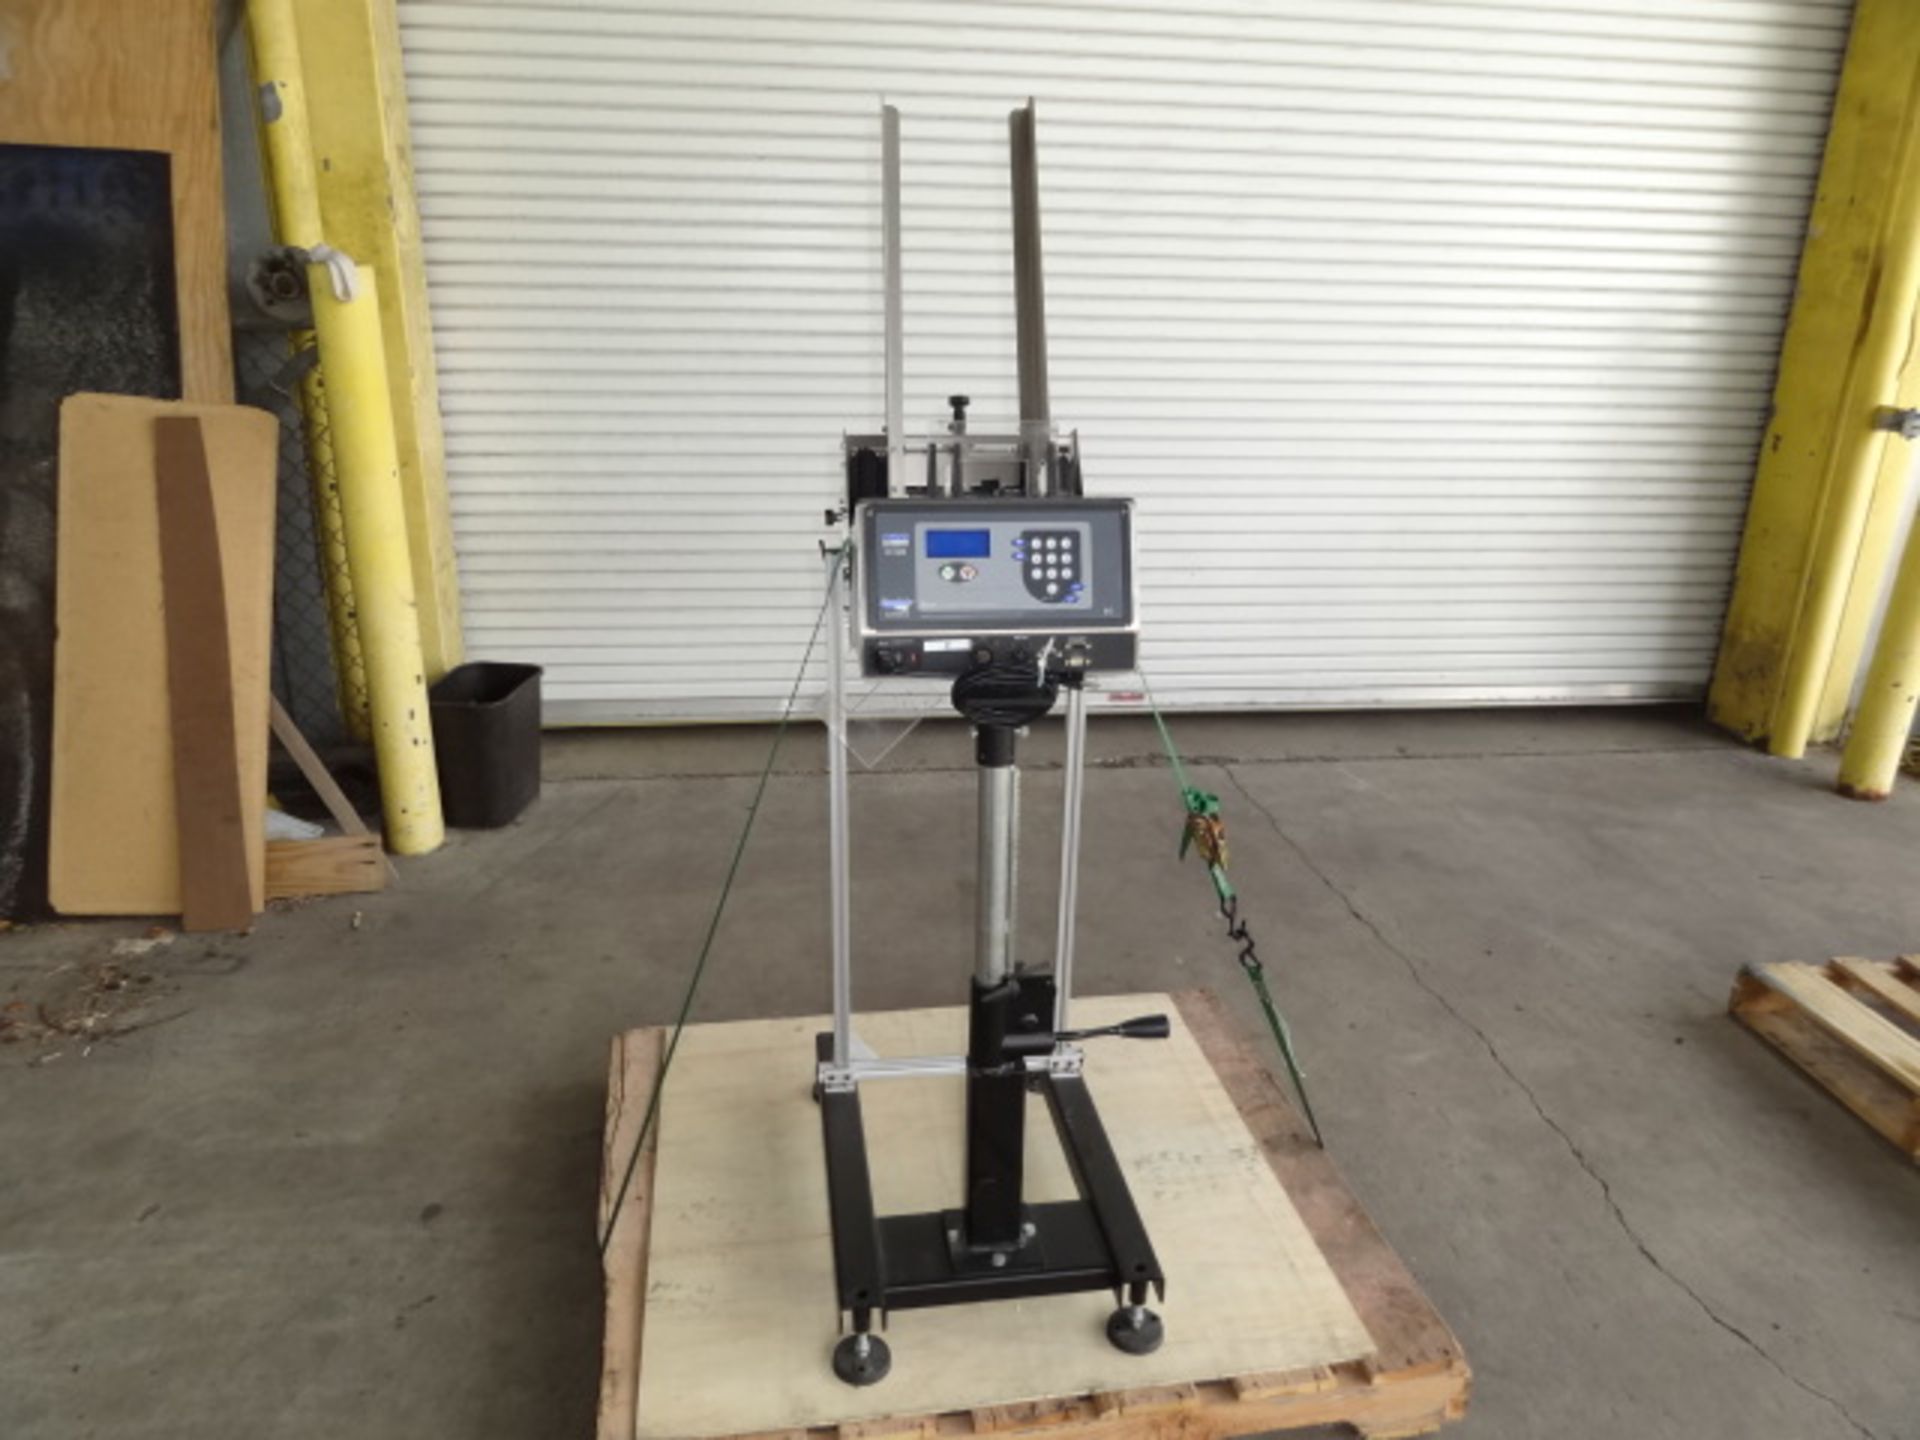 Streamfeeder Friction Feeder, Model # ST-1250 PRO, S/N 1250EXA442, for placing pamphlet , borchure